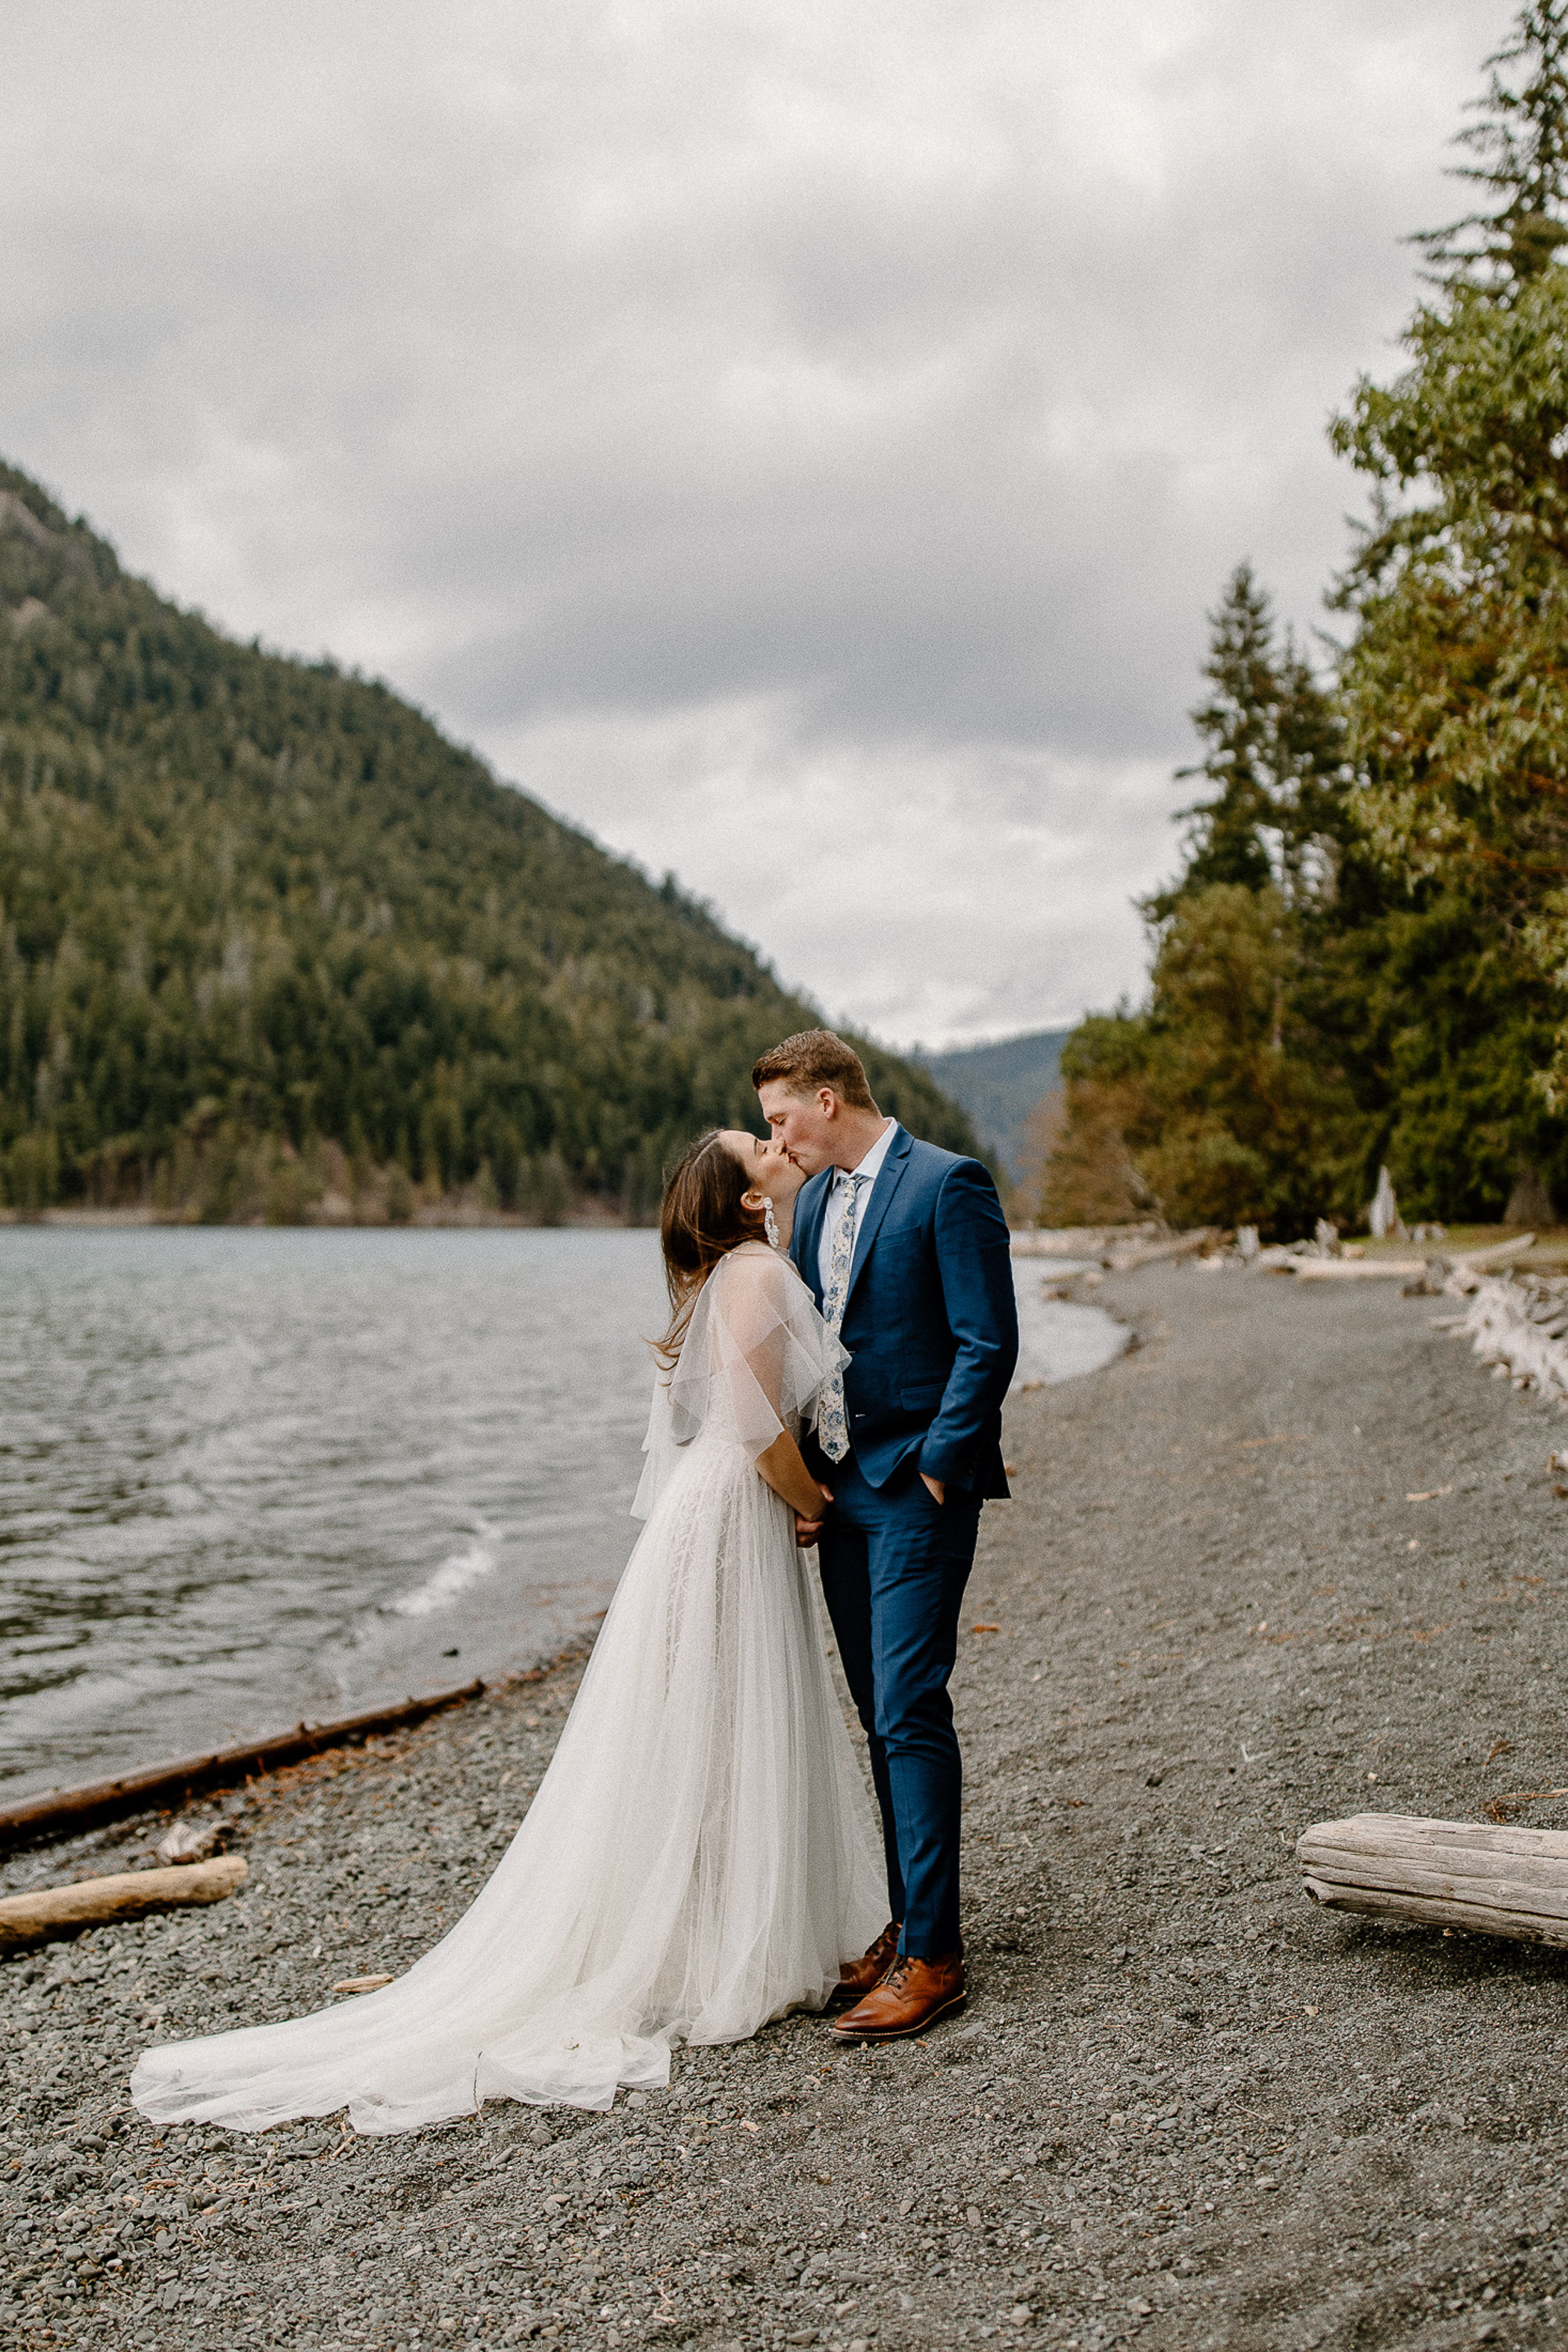  Lakeside private elopement for bride and groom